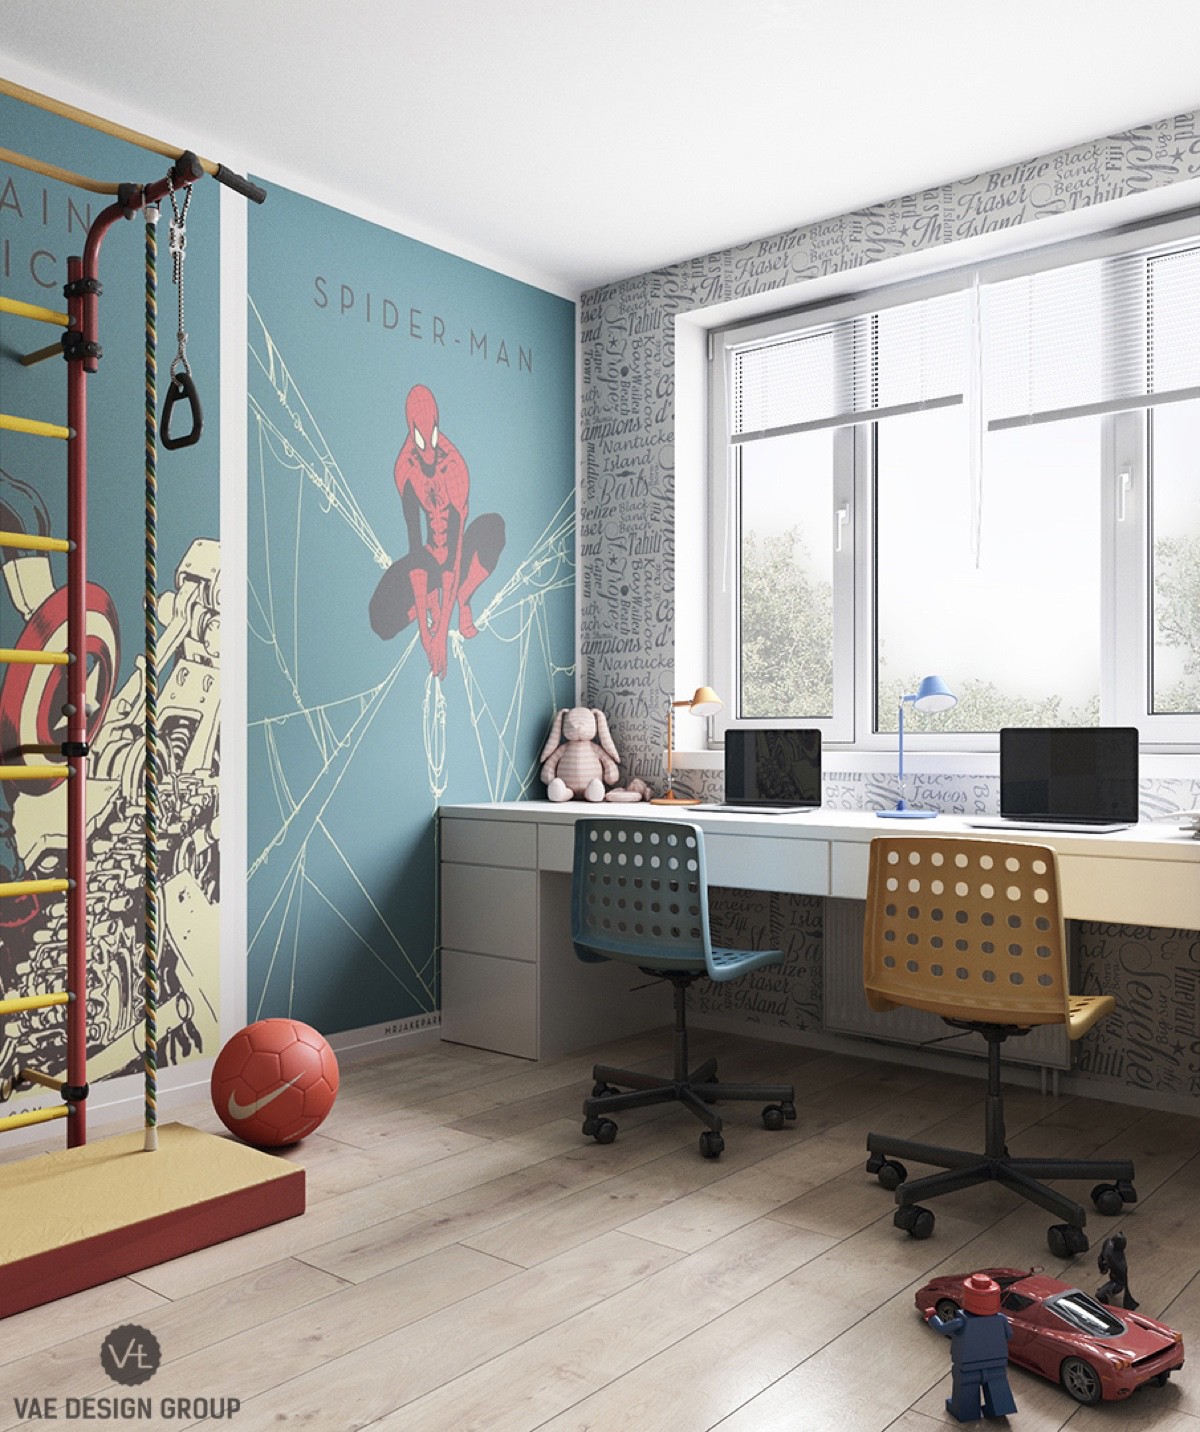 spiderman-workstation-lego-themed-chairs-funky-workspace